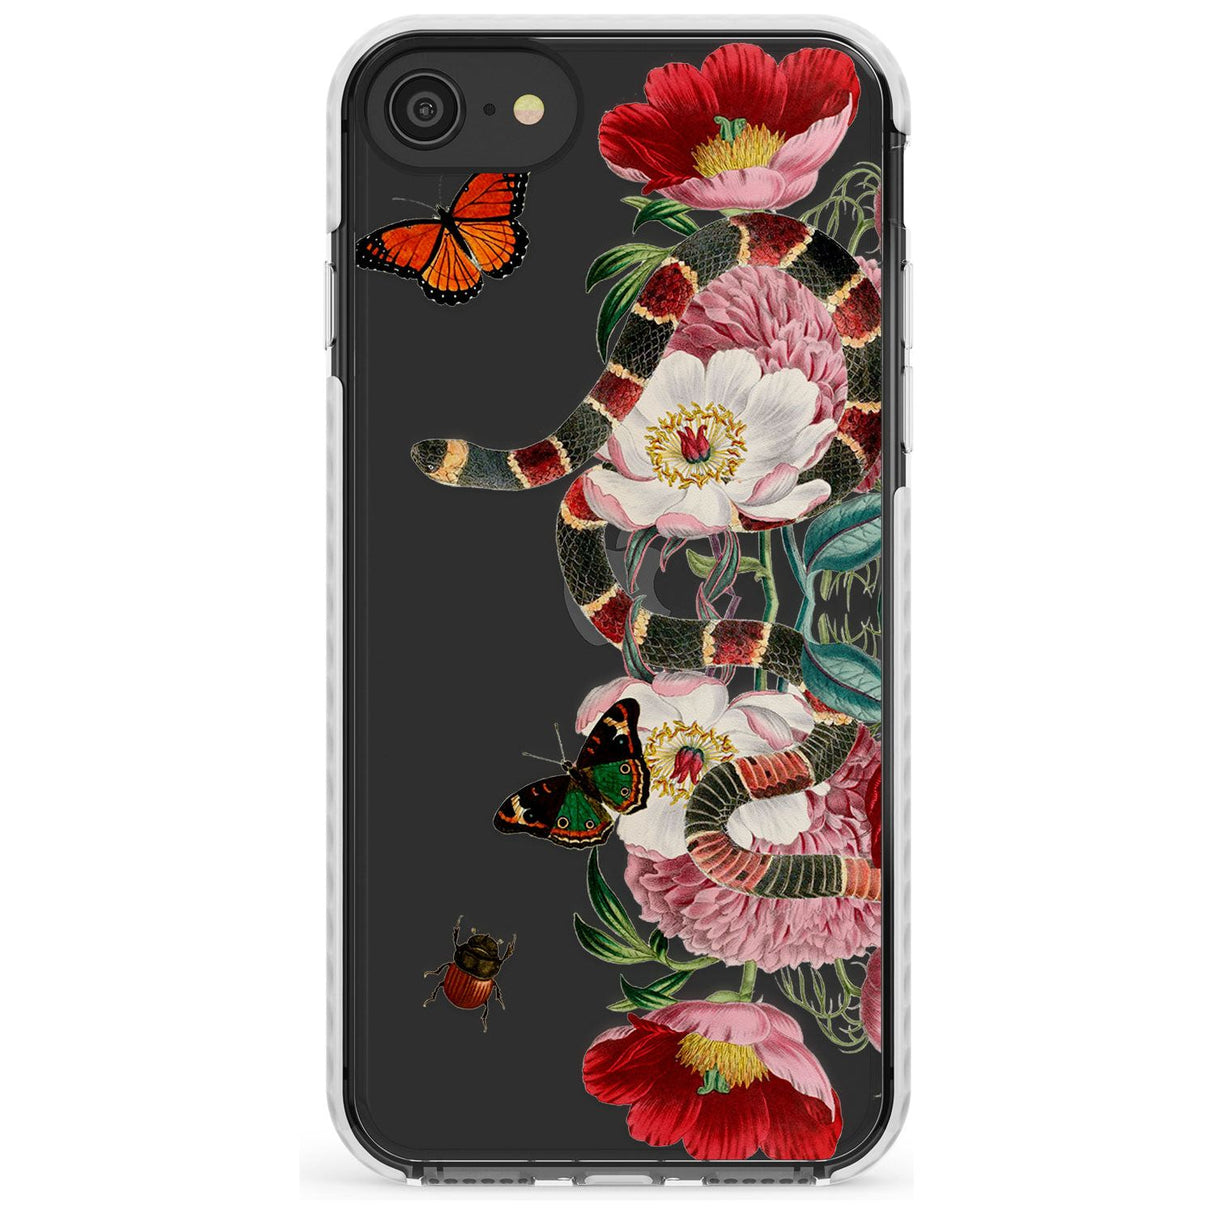 Floral Snake Slim TPU Phone Case for iPhone SE 8 7 Plus